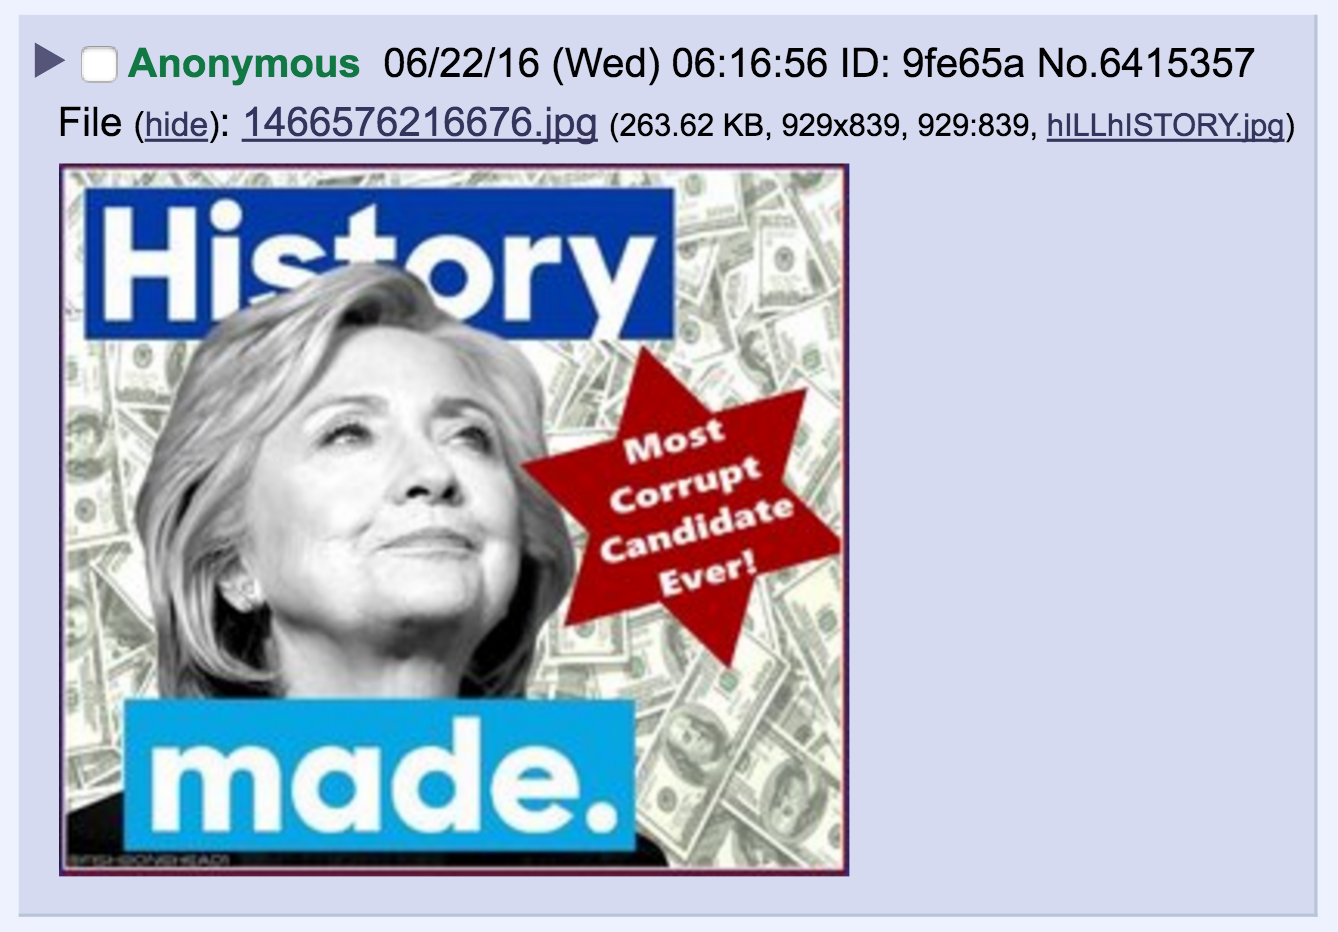 The offensive meme appeared on the notorious message board /pol/ at least a week before it was tweeted by the Trump campaign